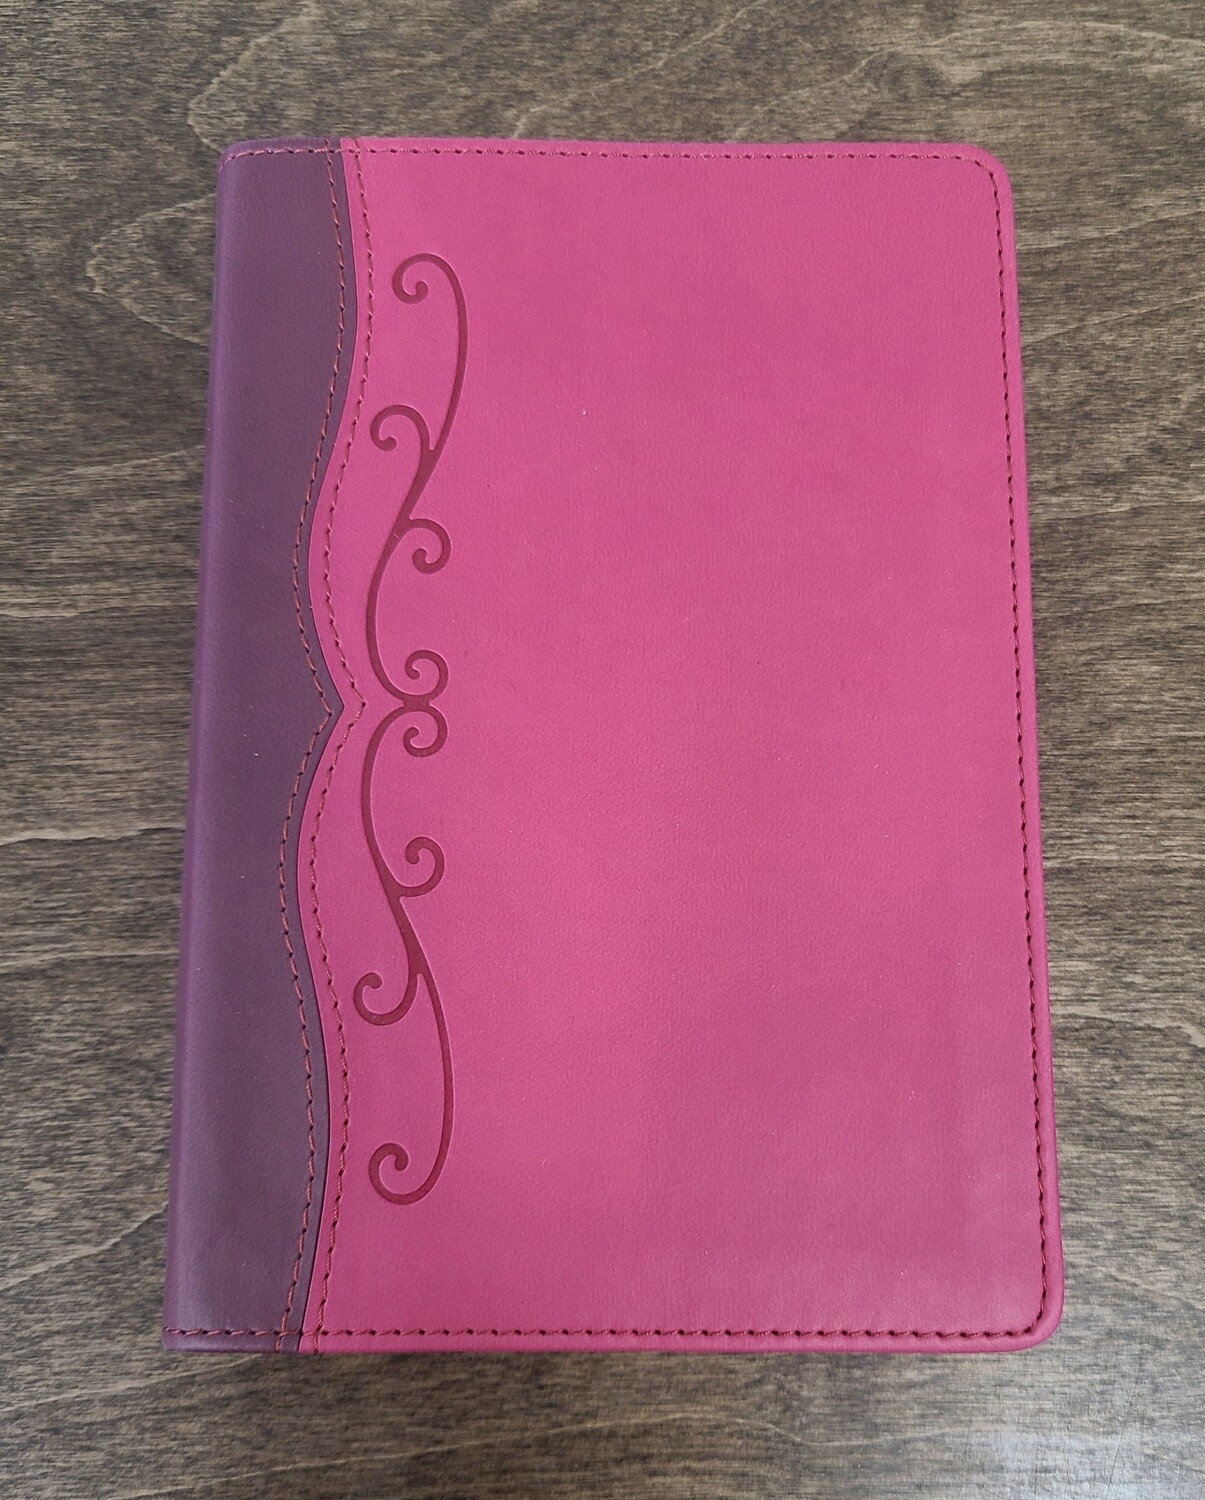 NKJV Compact Ultrathin Bible for Teens - Fushia Leather Touch